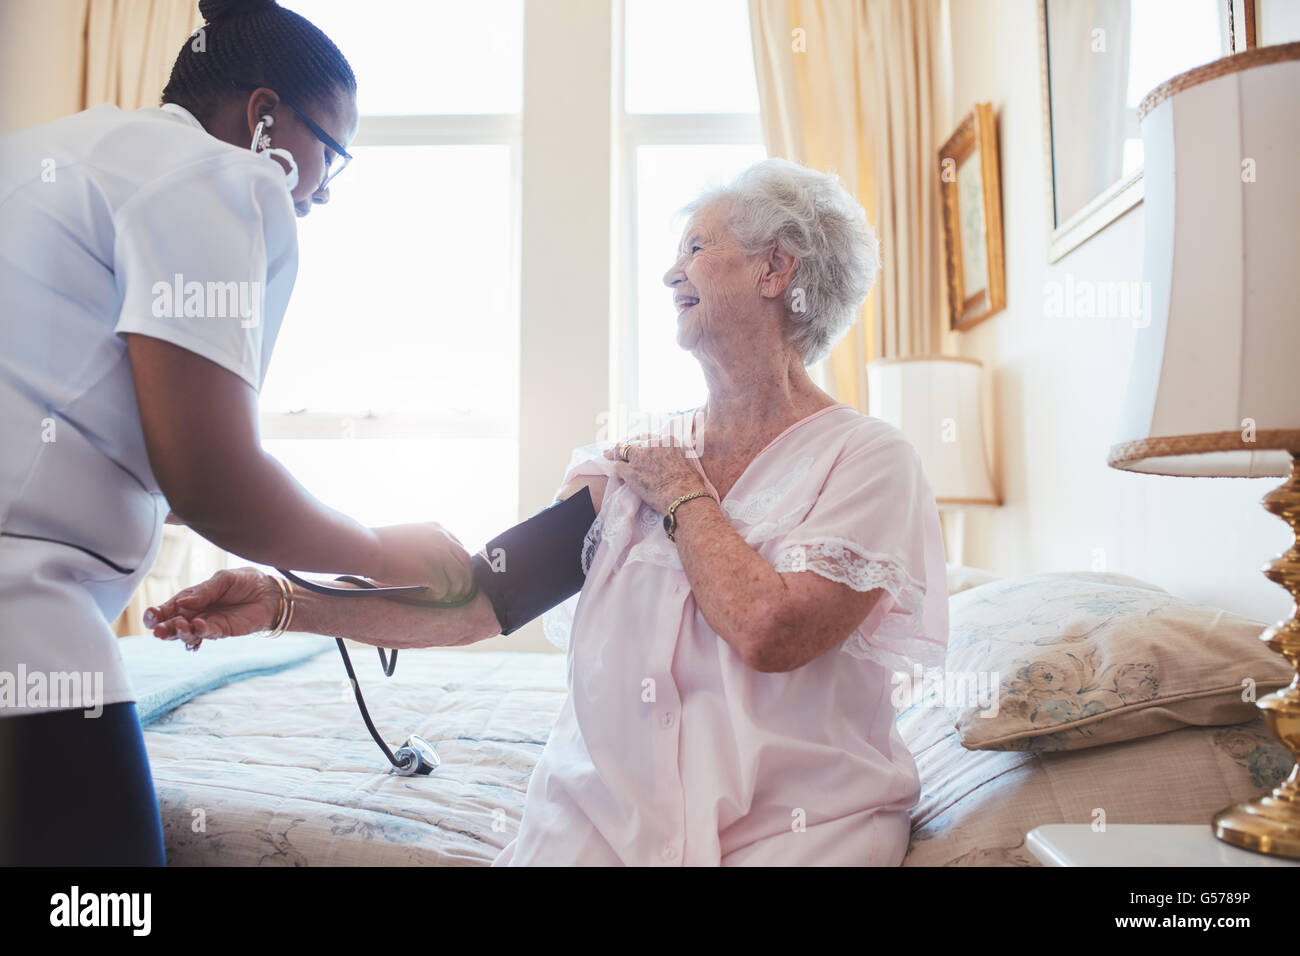 Nurse visiting senior female patient at home and taking blood pressure. Old woman sitting on bed. Stock Photo